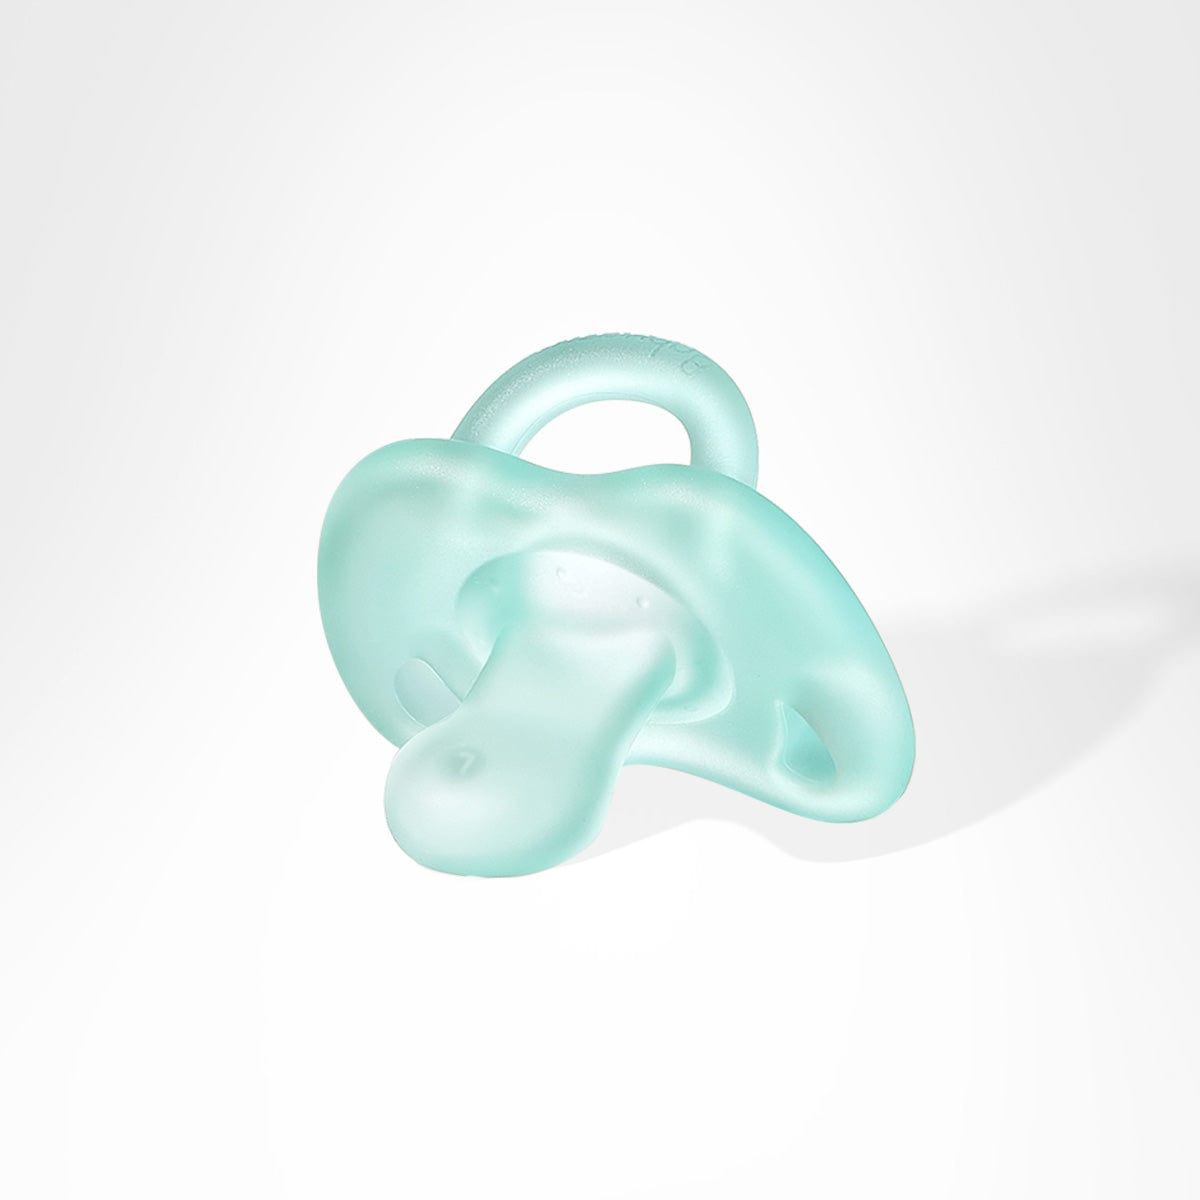 Food Feeder Pacifiers- Bc Babycare